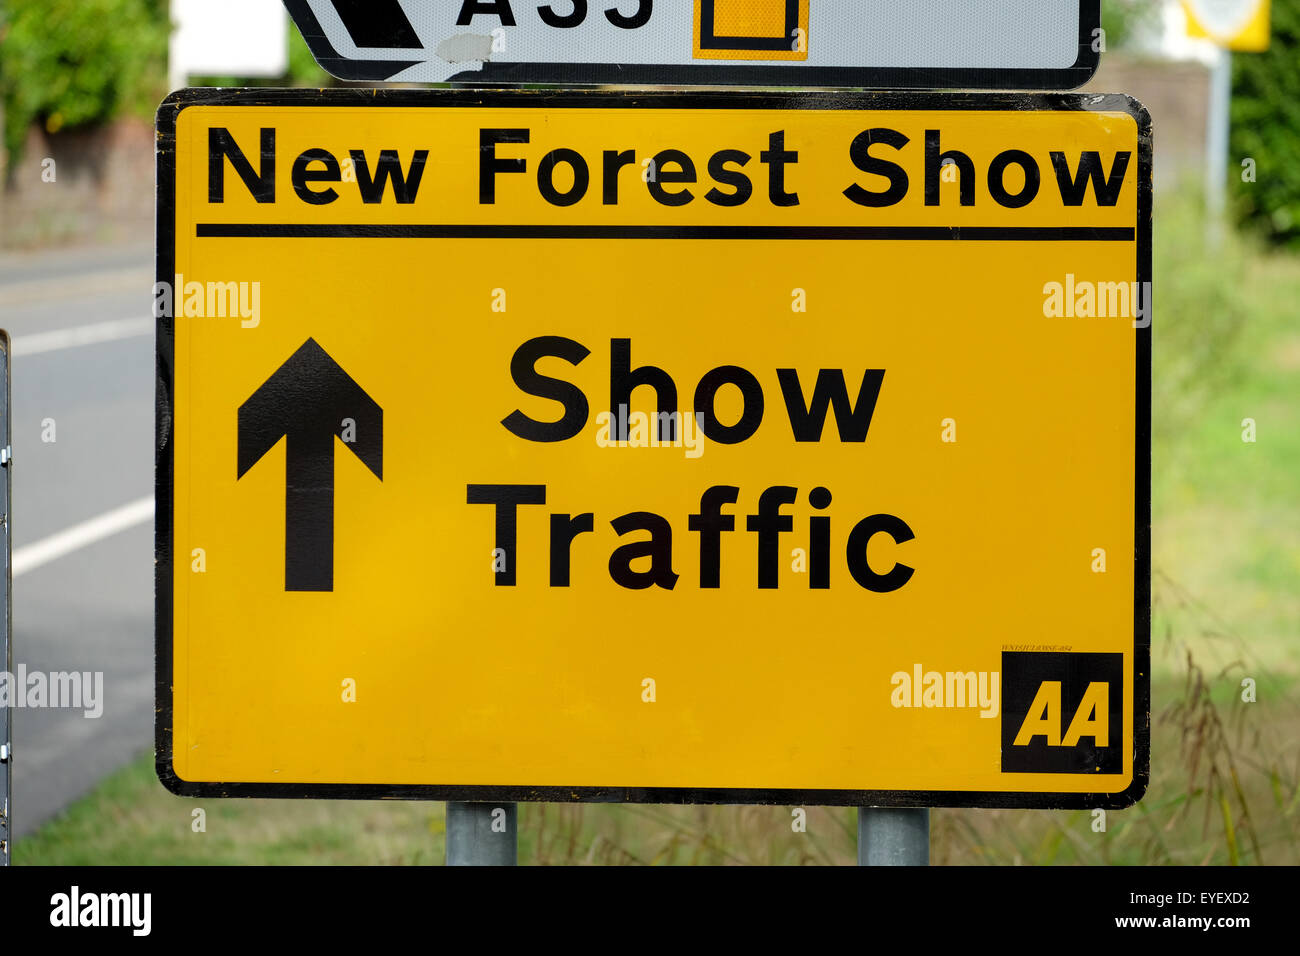 Road sign for the New Forest Show with traffic in the background Stock Photo